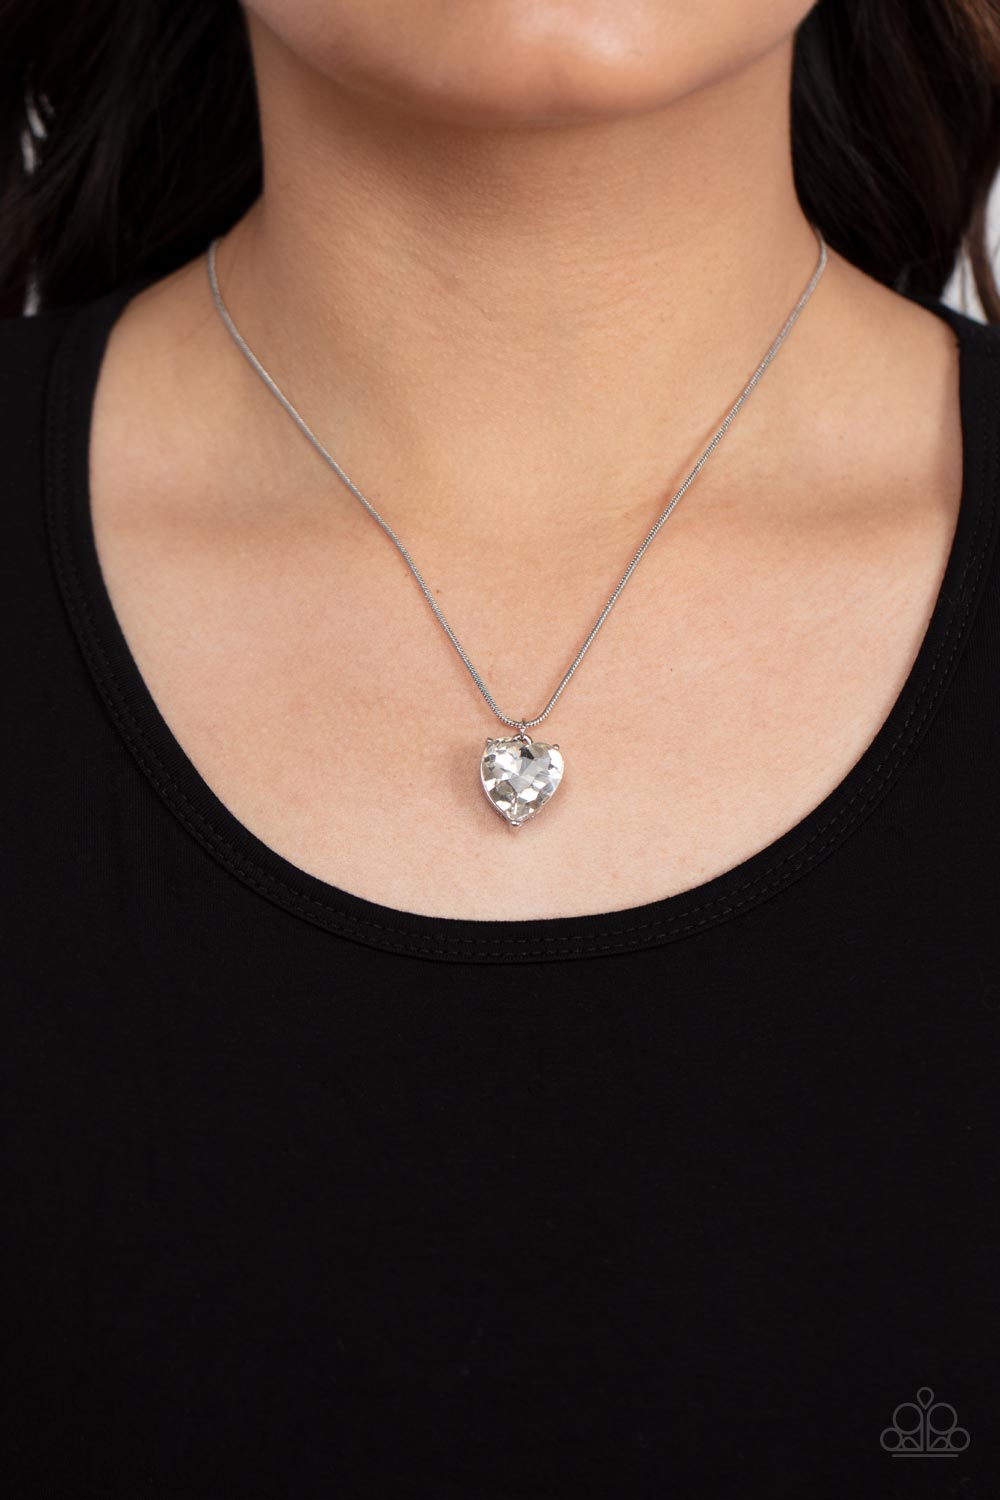 Smitten with Style White Rhinestone Heart Necklace - Paparazzi Accessories-on model - CarasShop.com - $5 Jewelry by Cara Jewels